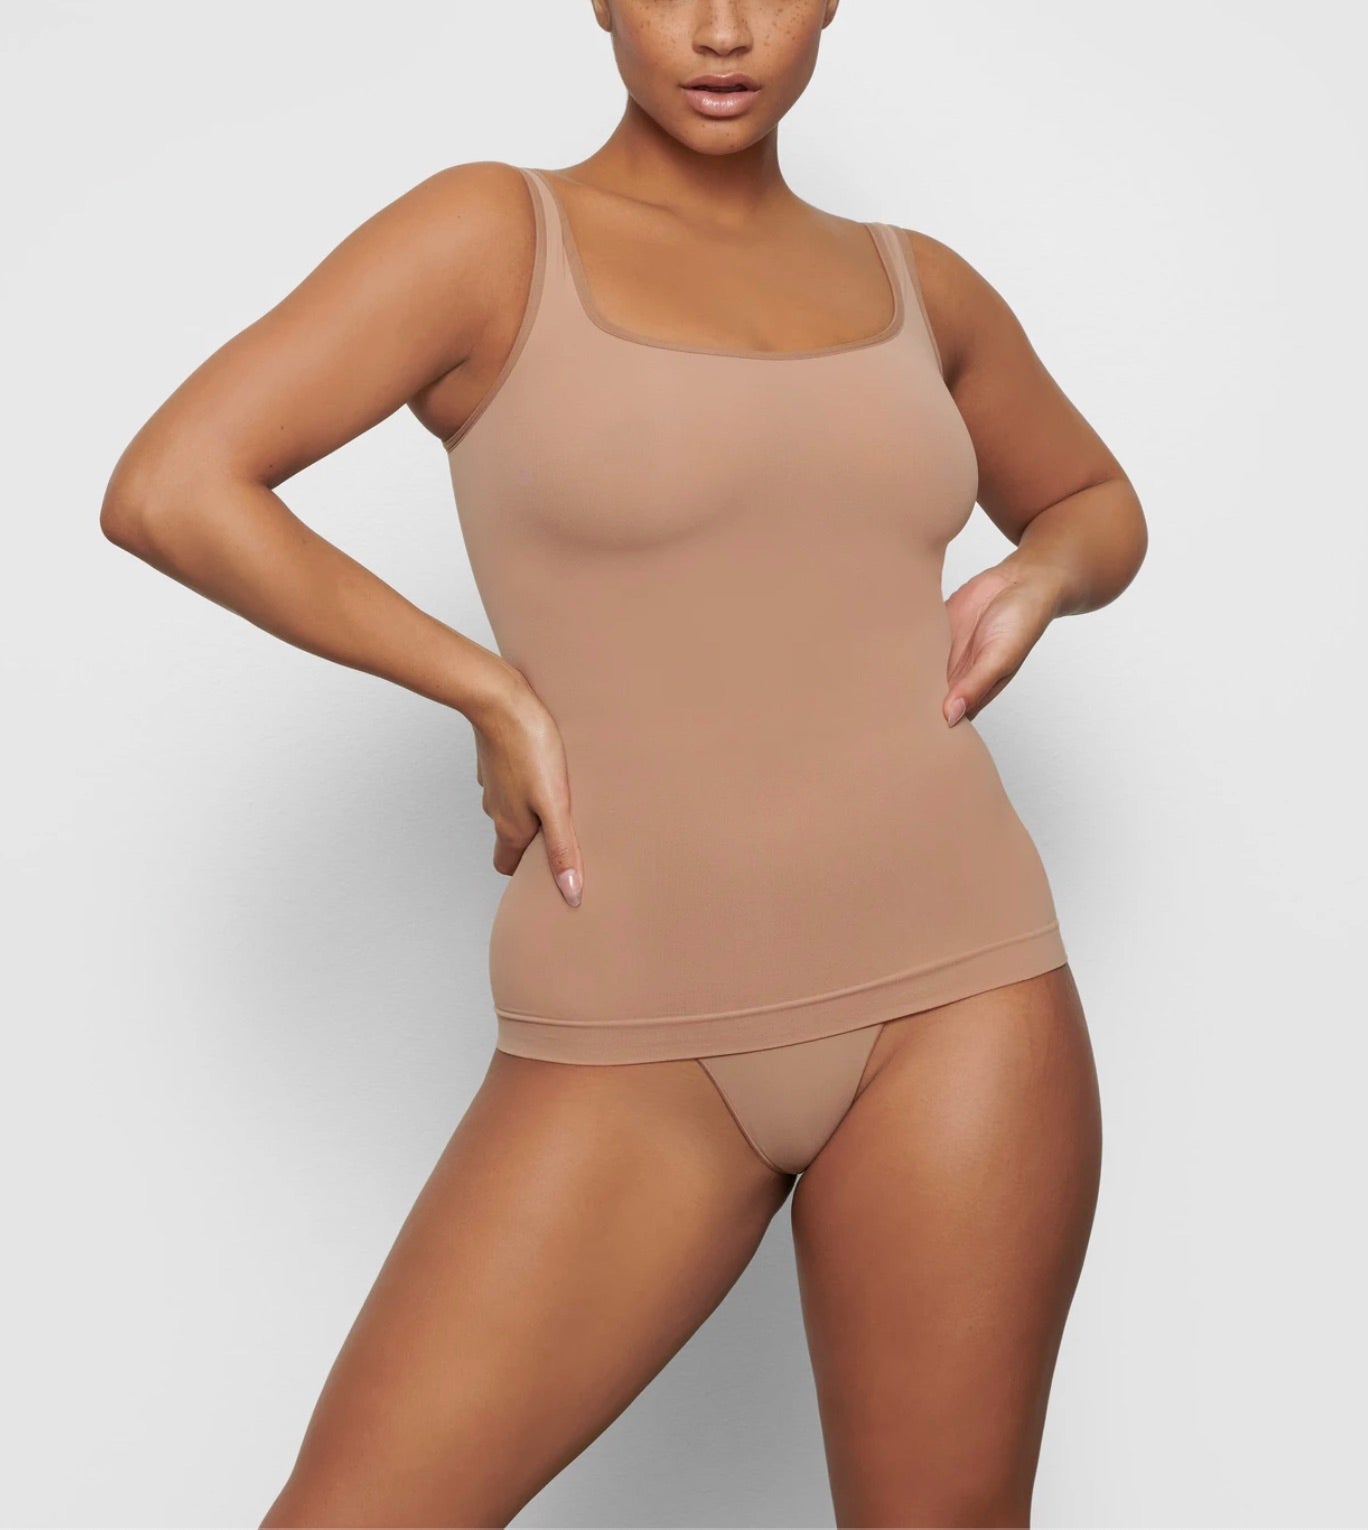 SKIMS - SKIMS Solutionwear — the shapewear that disrupted the